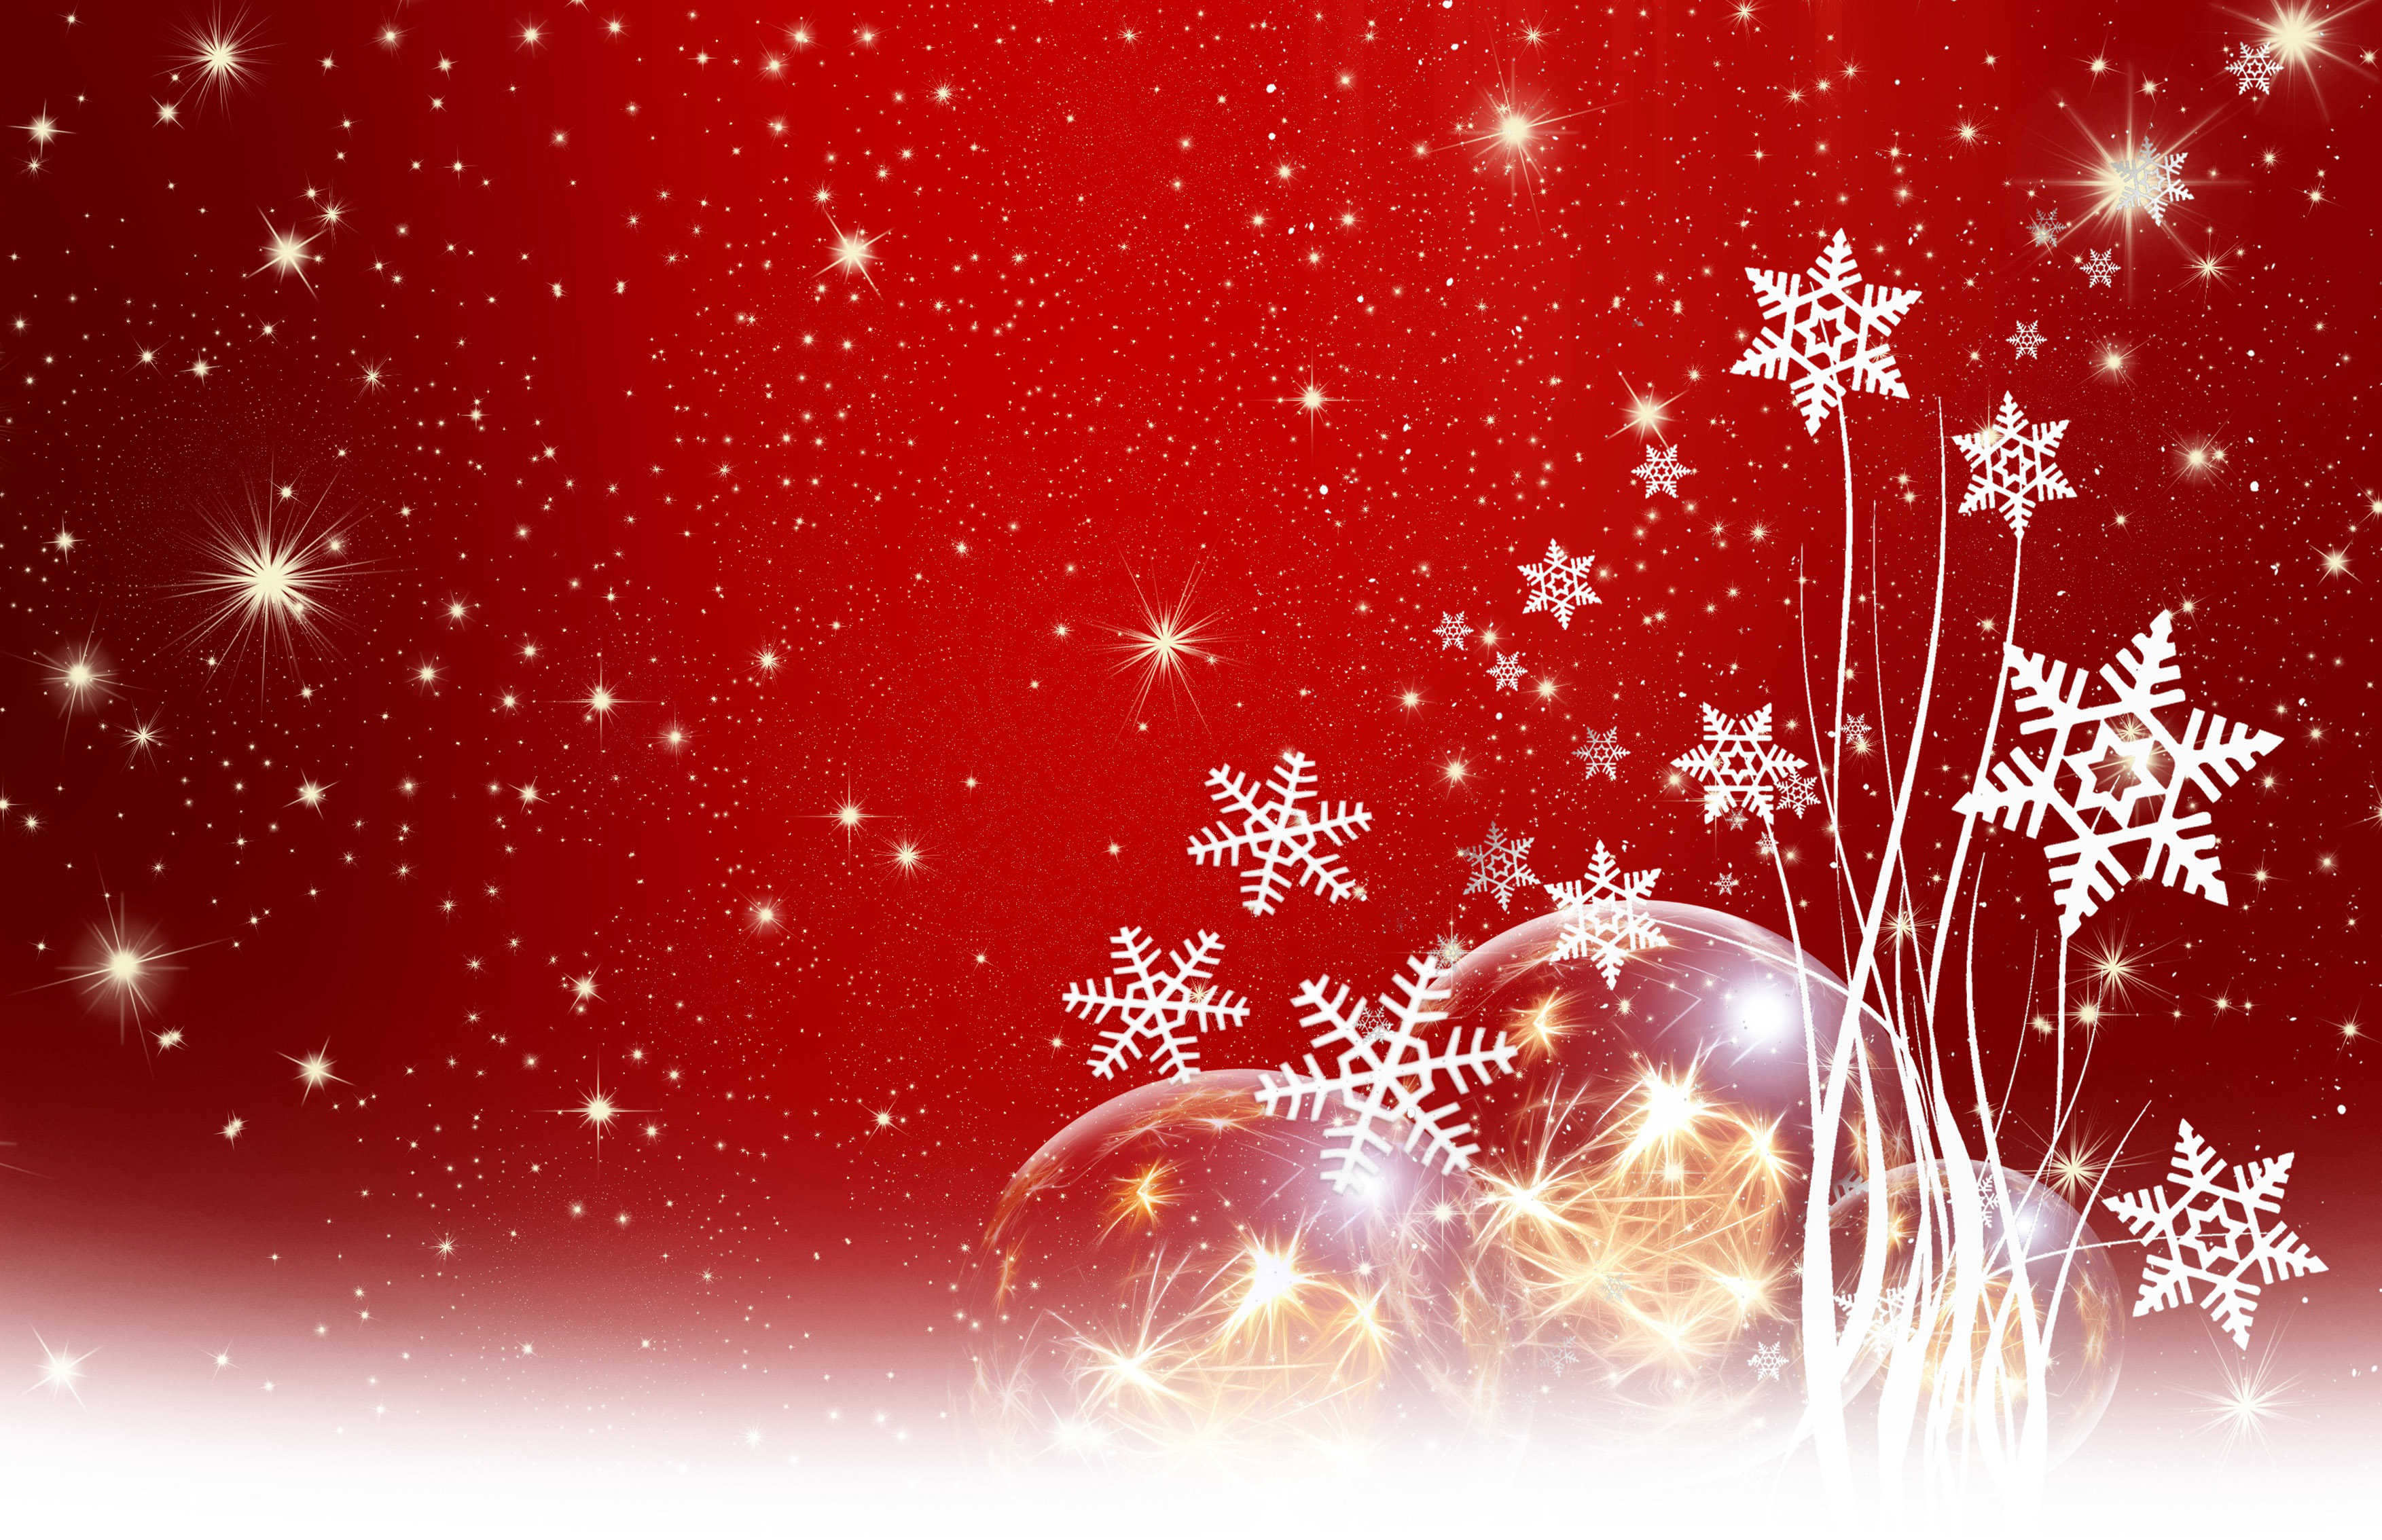 Great Pictures For Christmas Wallpaper Background Image